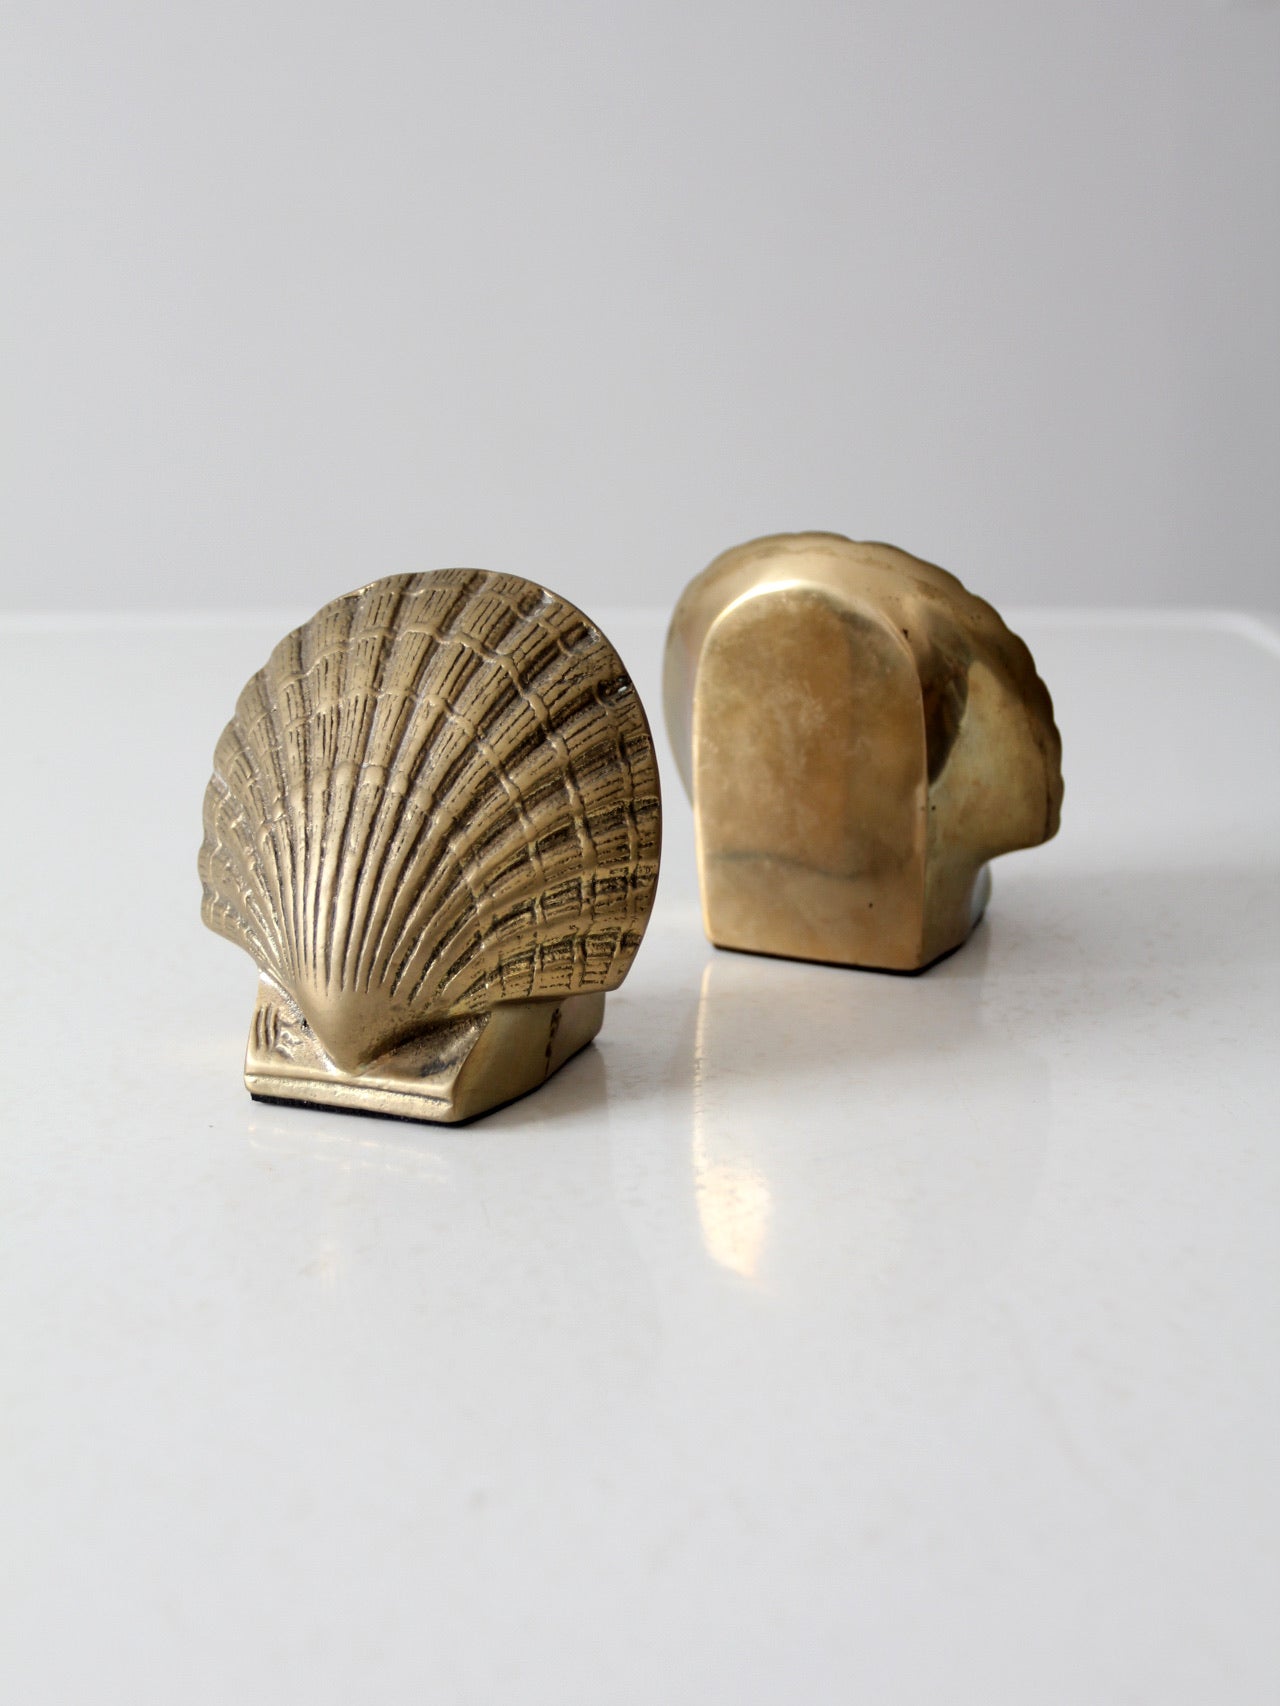 Brass Seashell Bookends Heavy Detailed approx 8 x 4 x 3.5